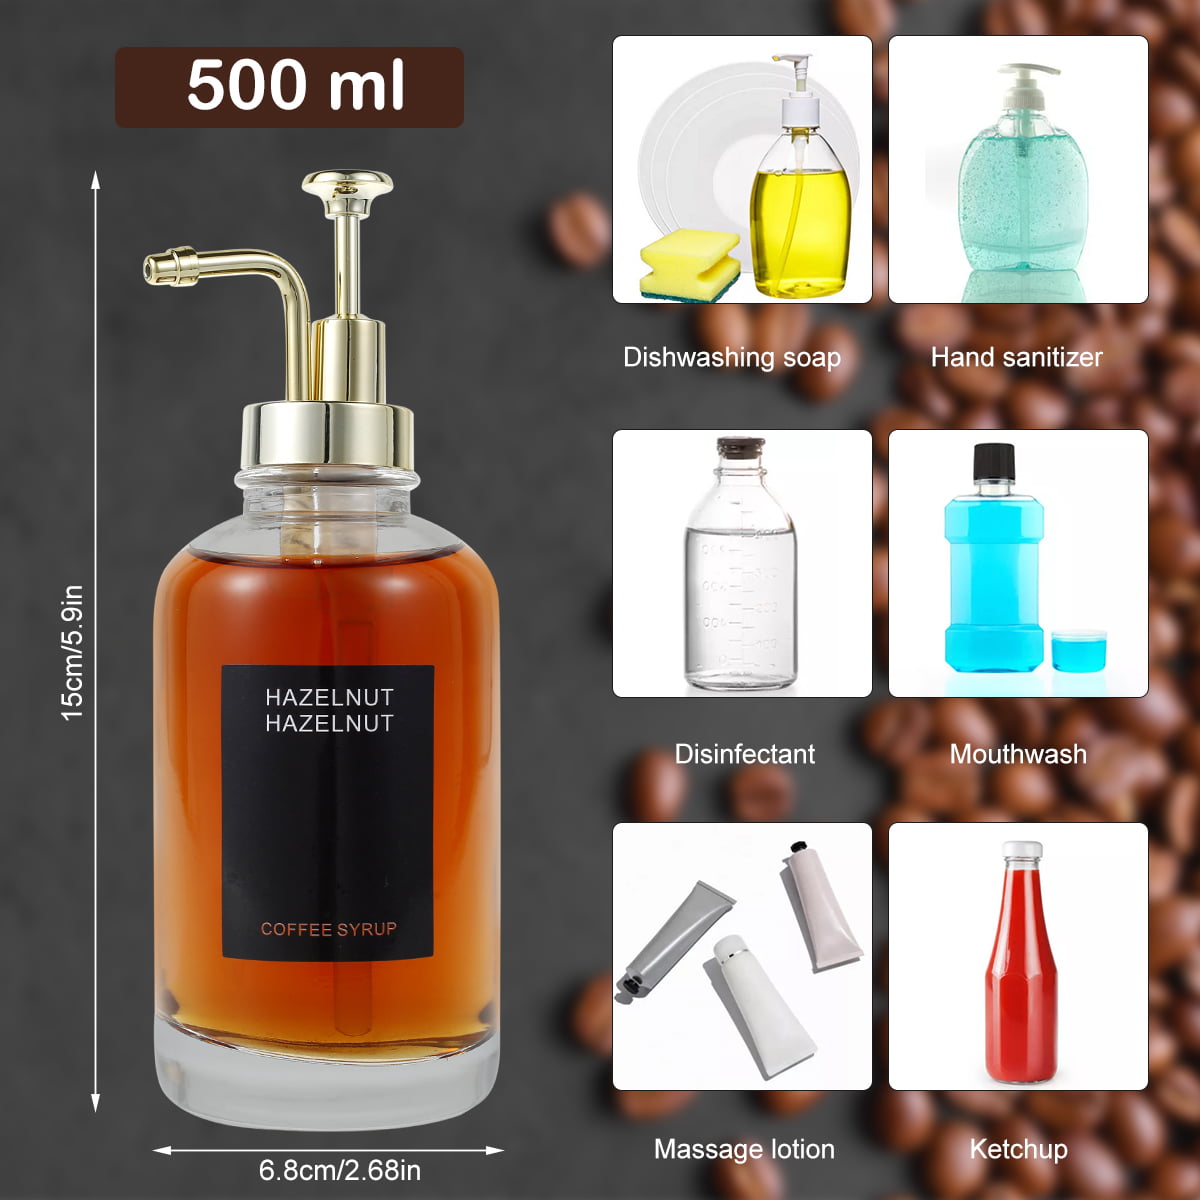  Set of 2 Coffee Syrup Dispenser for Coffee Bar, Coffee Pump  Dispenser with Tray Coffee Bar Accessories, Glass Syrup Bottle with Pumps  and Labels for Syrup Honey Dispenser, Stainless Steel